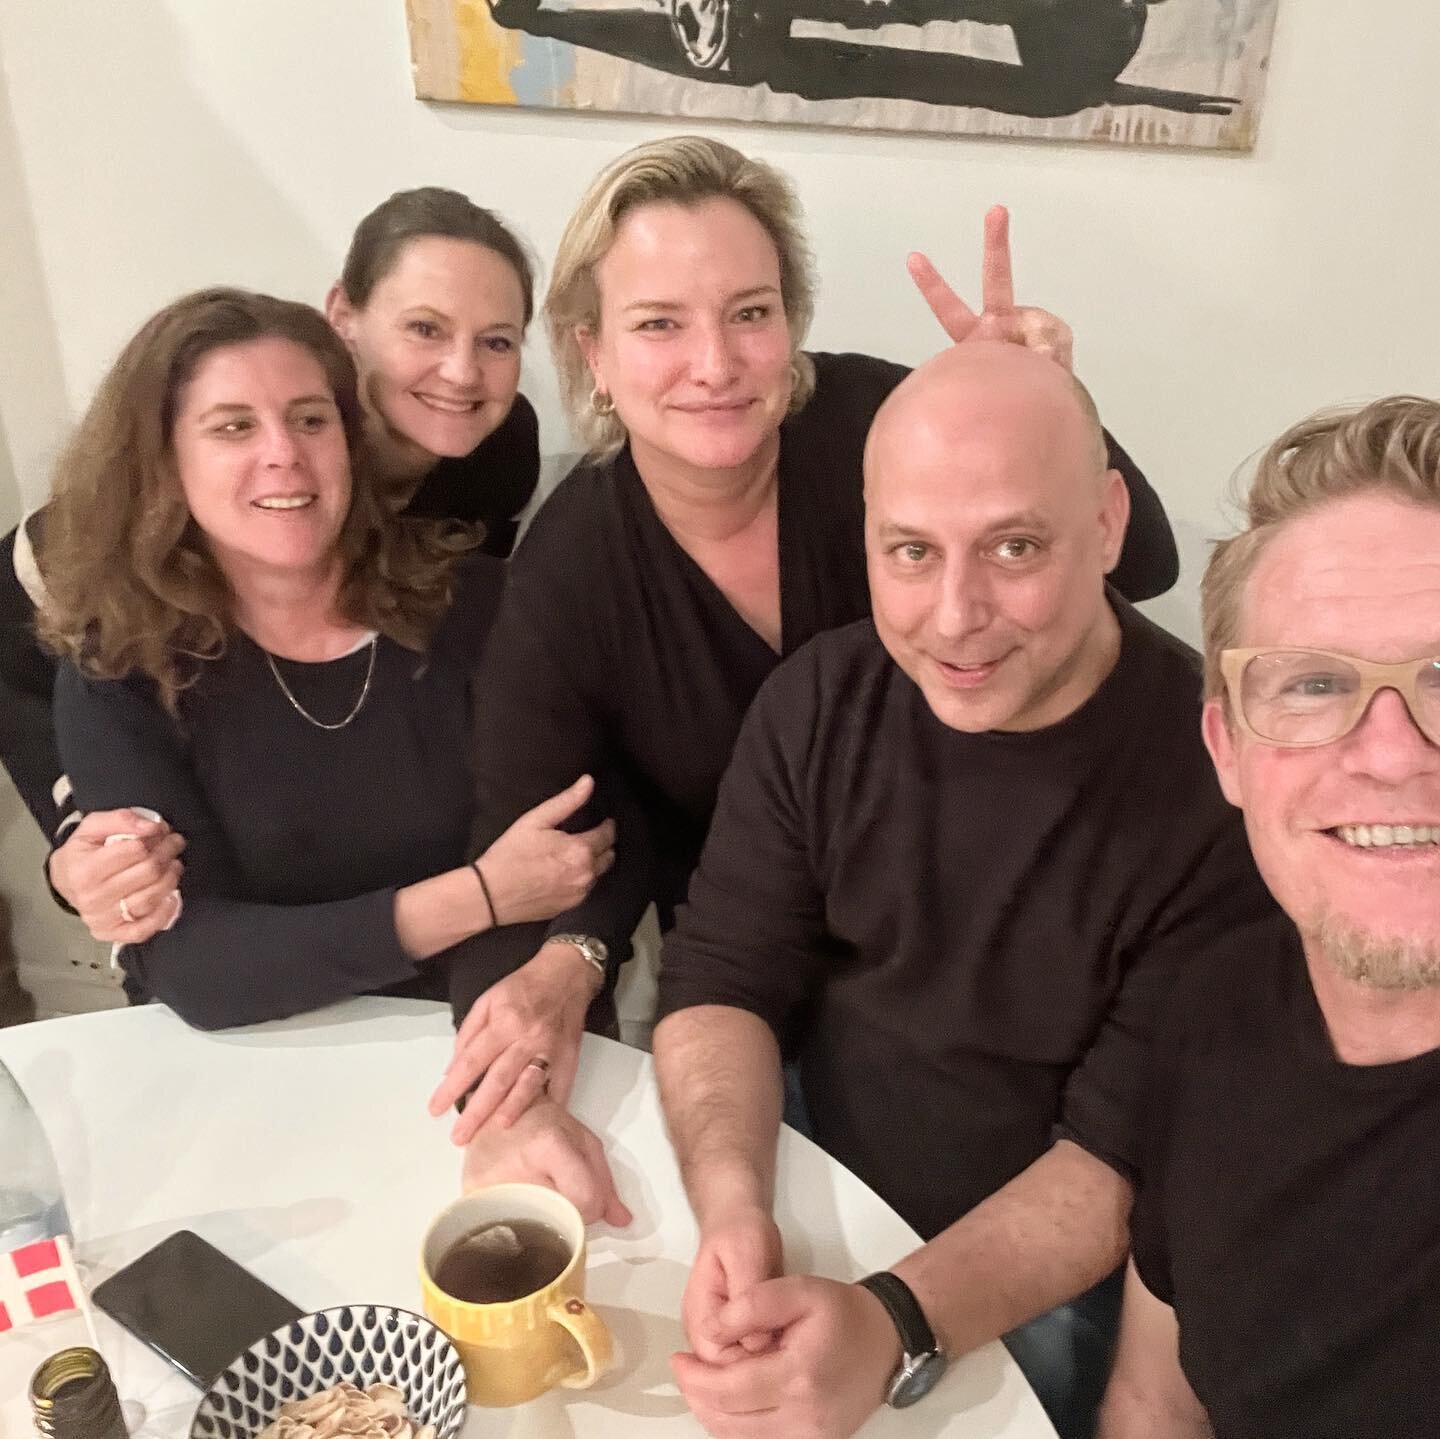 Five friends, thirty+ years apart. Danish Sommerskole was a project initiated back in the 80s for children of expats to learn the language and heritage of Denmark. More accurately, it provided an opportunity for a disparate group of teenagers from al